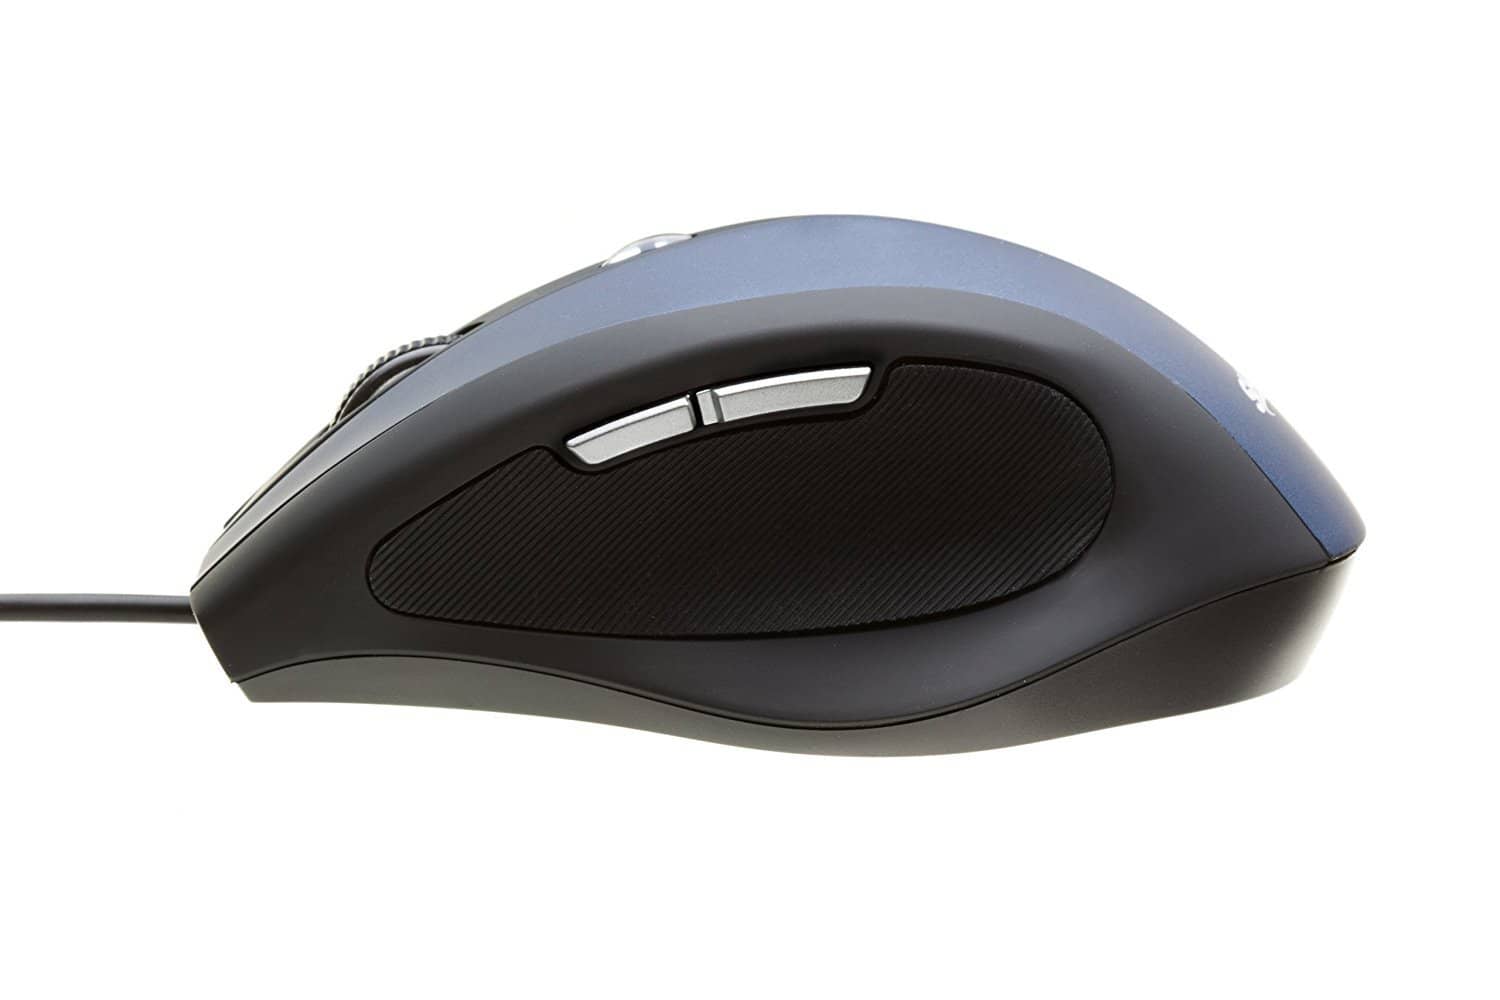 SHARKK High Precision Optical Wired Mouse